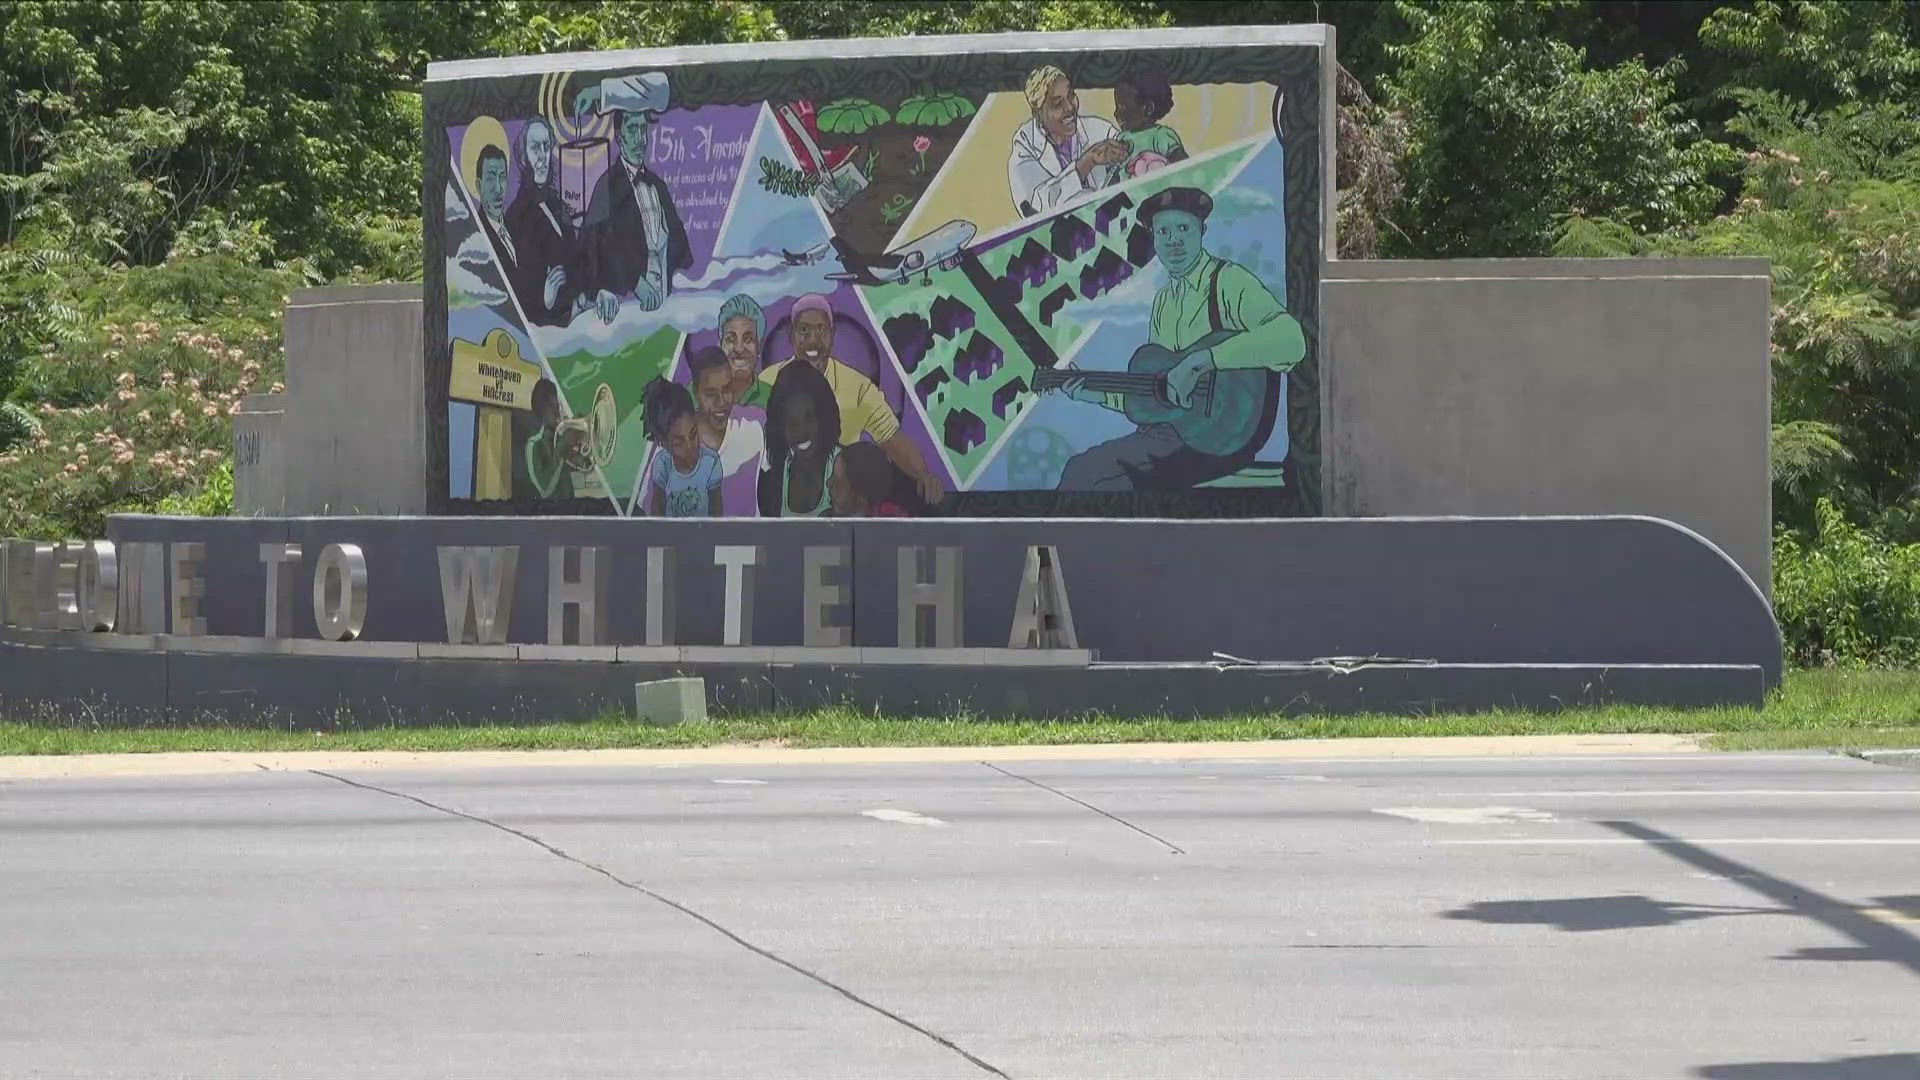 As Memphis City leaders consider a possible property tax increase, Whitehaven residents want to know where their tax money is going.